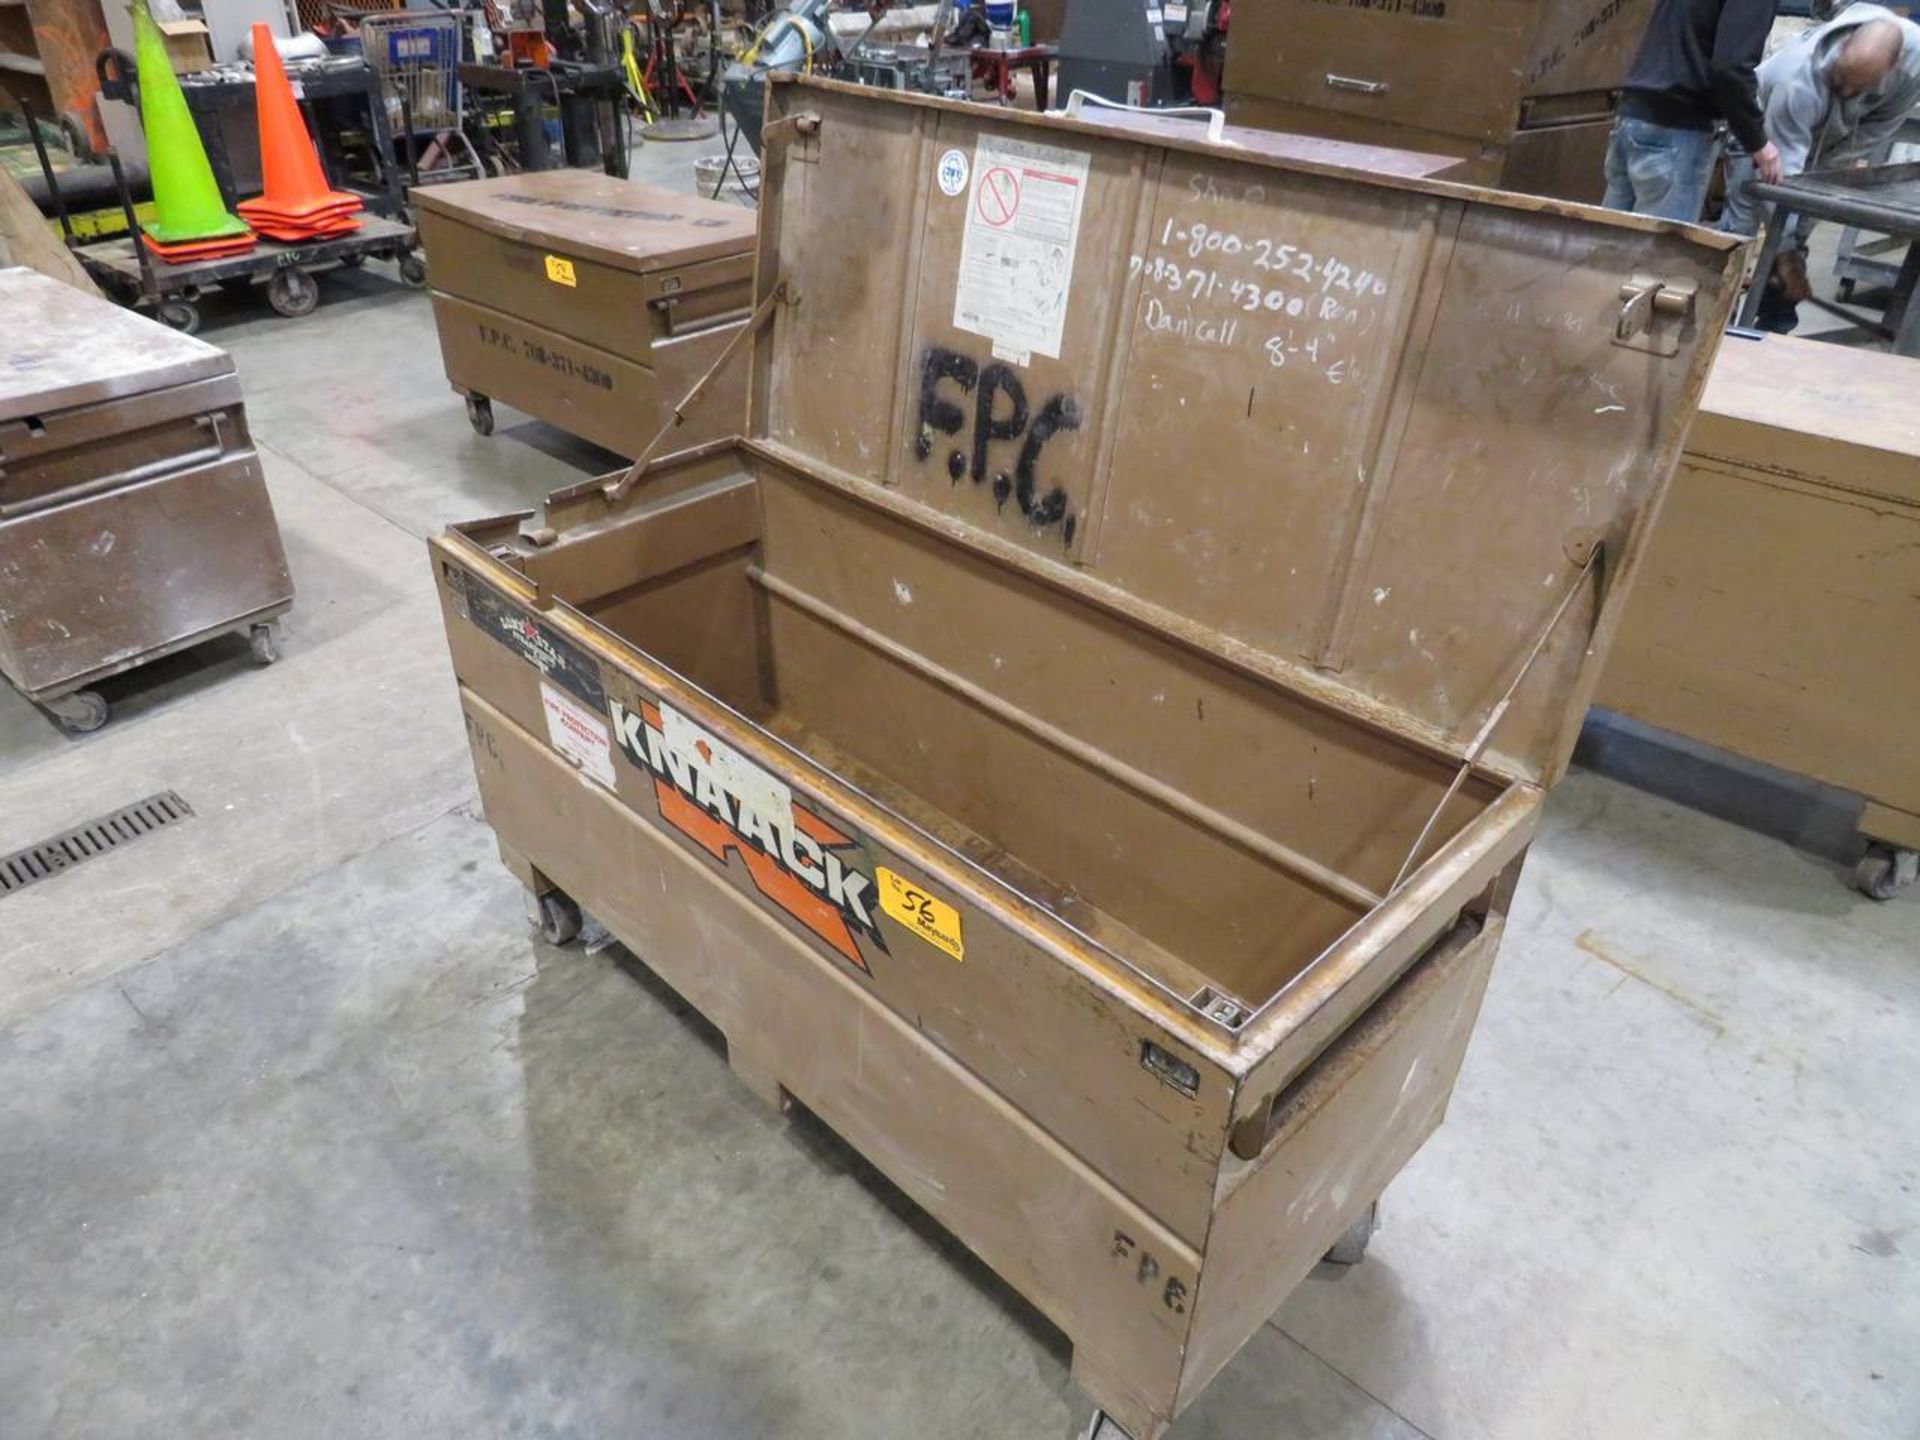 Knaack 20.25 Cu. Ft. - Approx. 60" W x 24" D x 35" H Storage Chest - Image 2 of 6